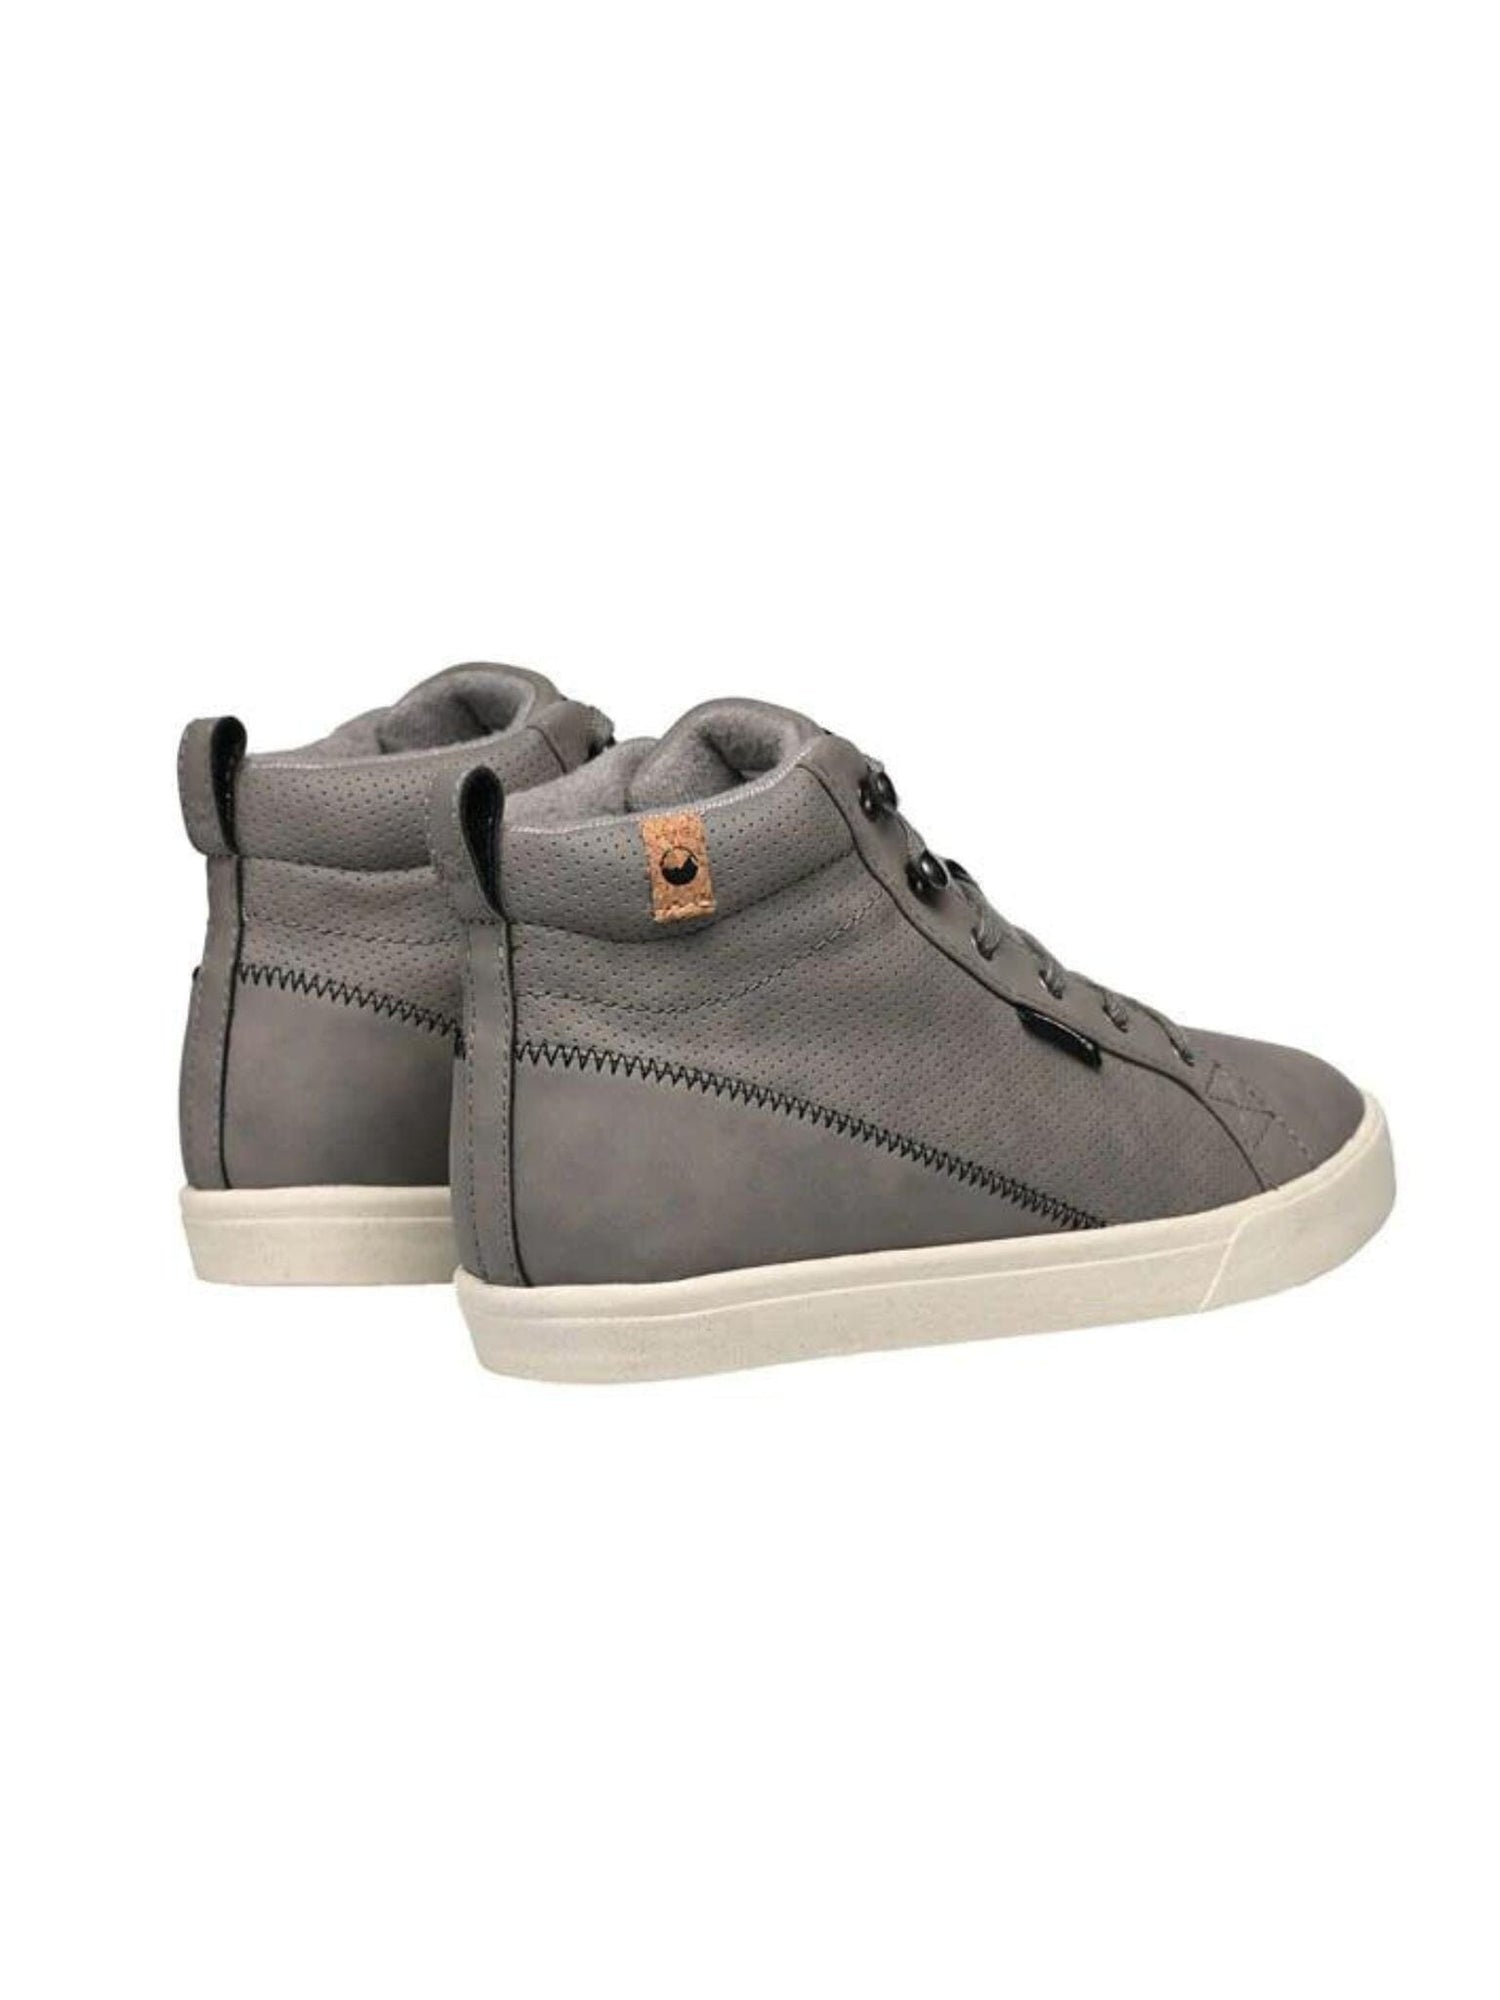 Saola W's Wanaka Waterproof Sneakers - Recycled PET and bio-sourced materials Dark Grey Shoes